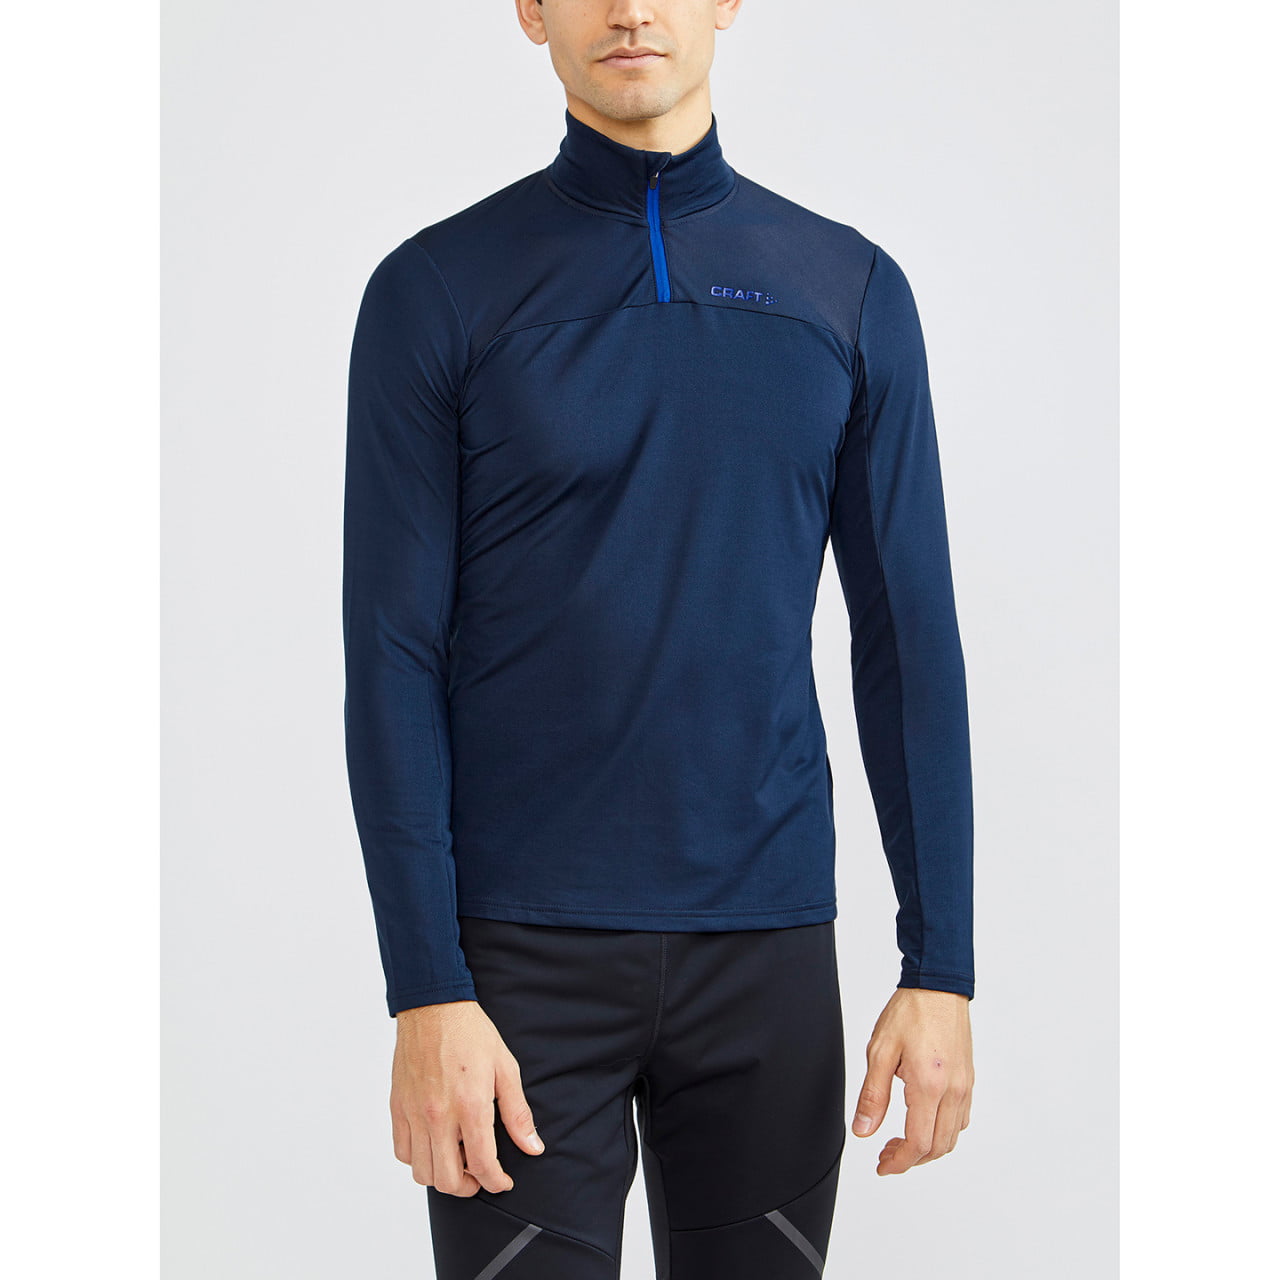 Maillot manches longues CORE Gain midlayer